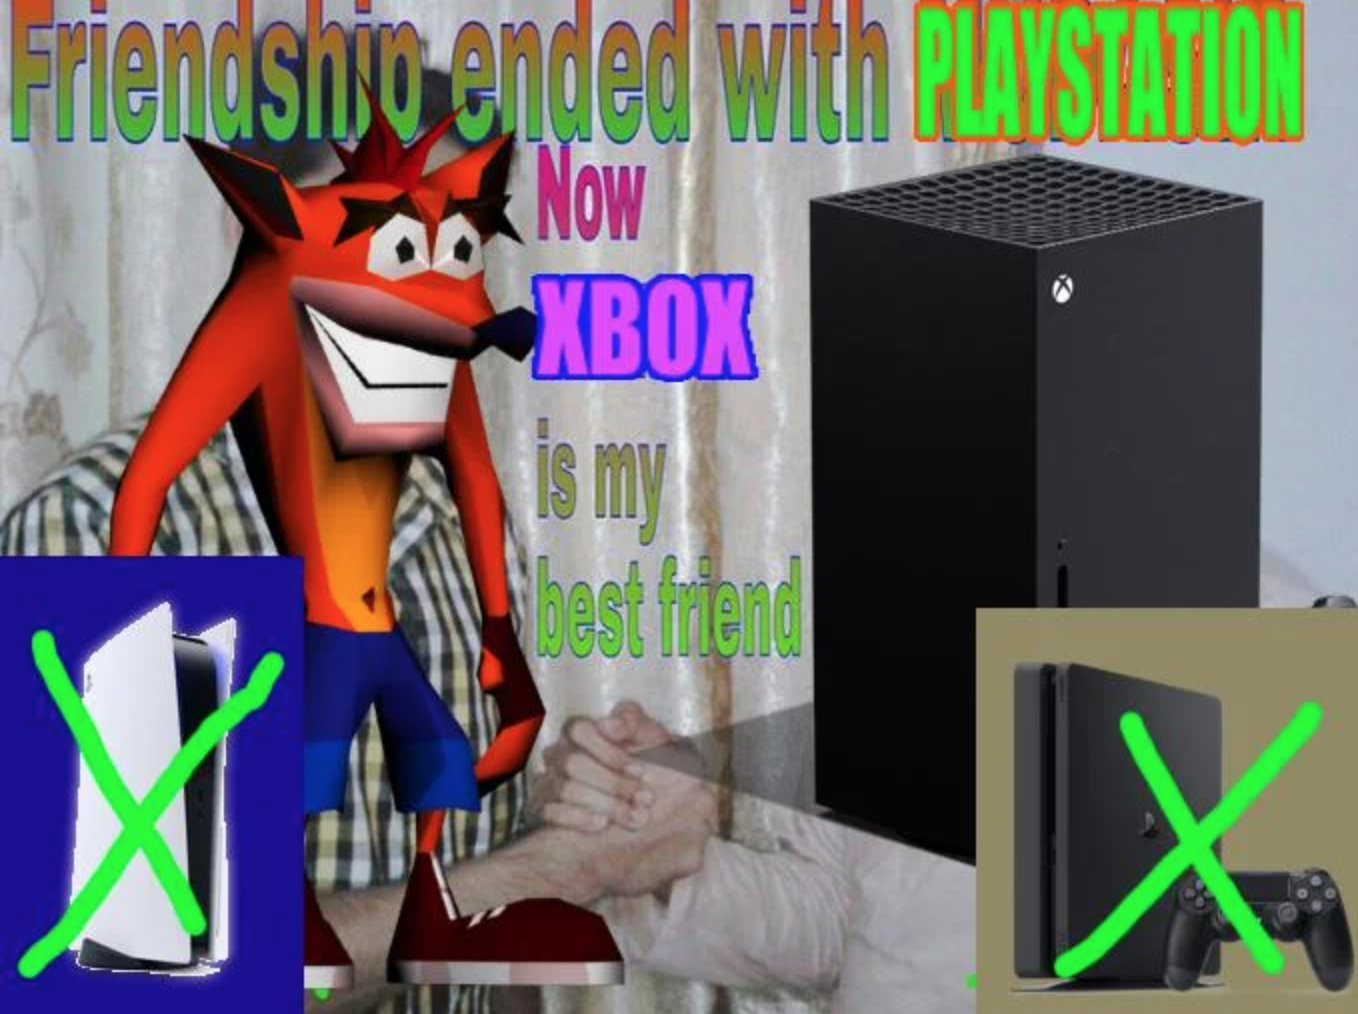 funny gaming memes - games - Friendshyo ended with Playstation Now Xbox is my I O.